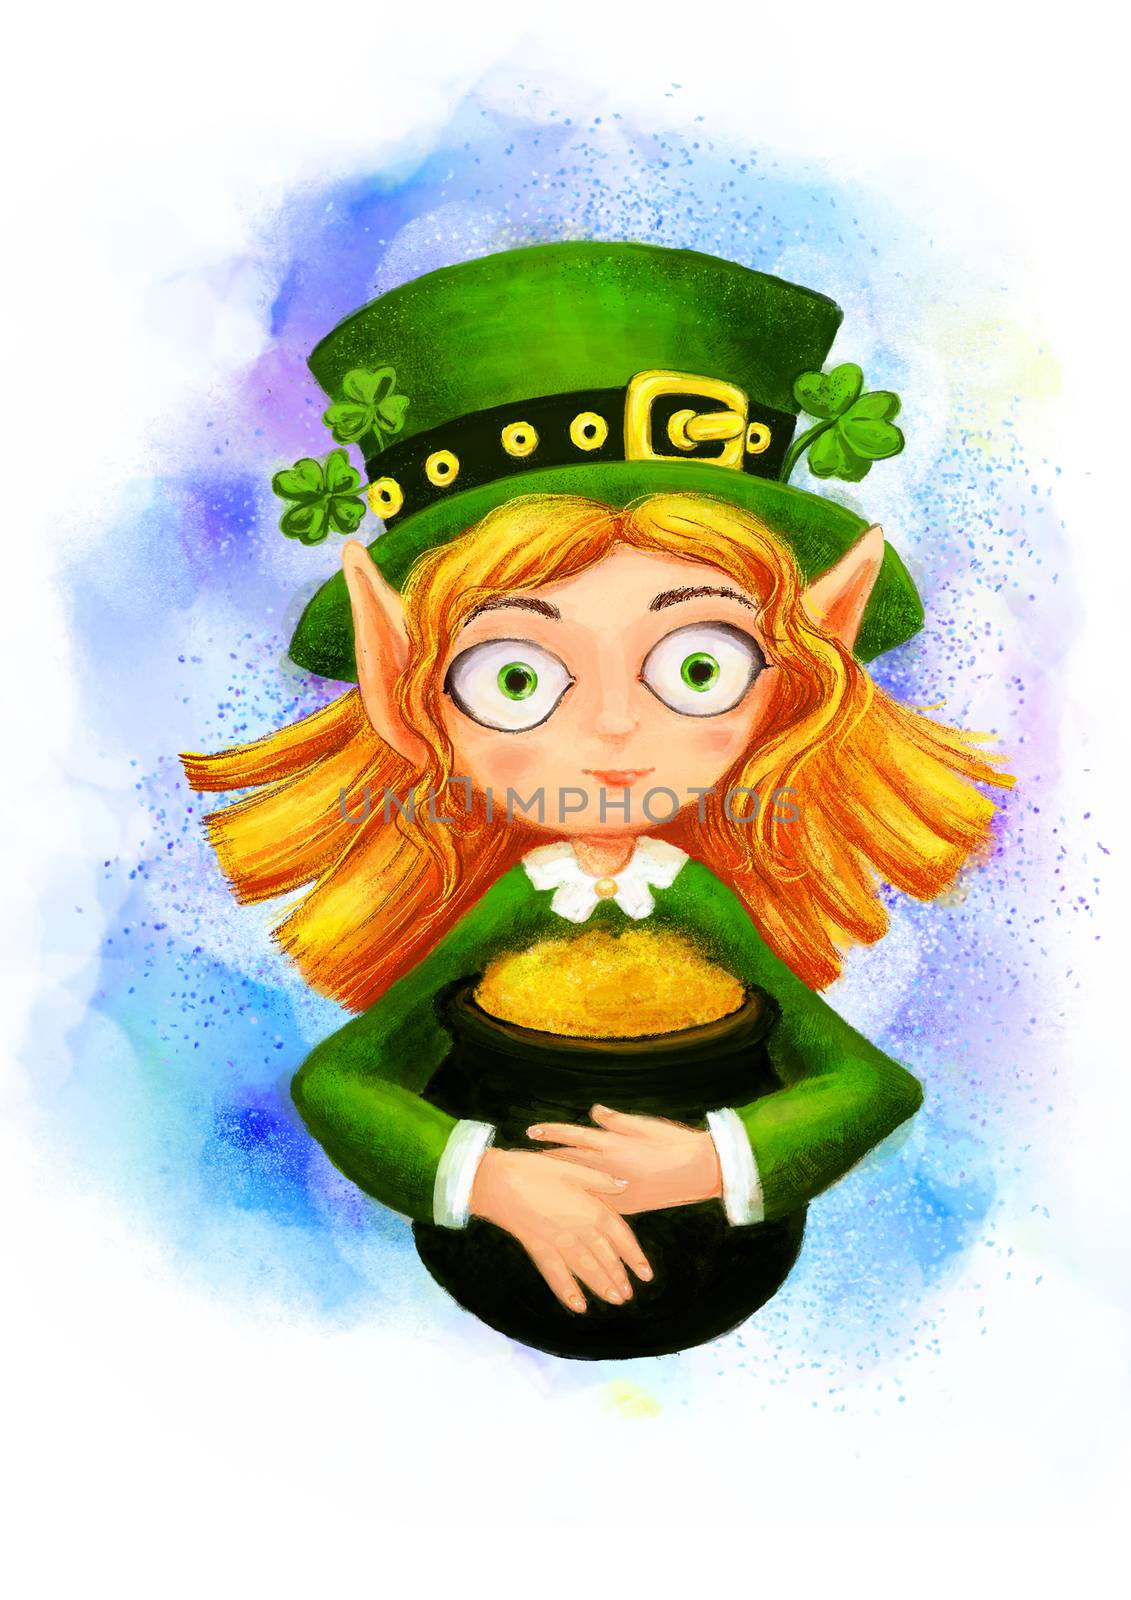 Leprechaun with a pot of gold and clover. Illustration for St. Patrick's Day